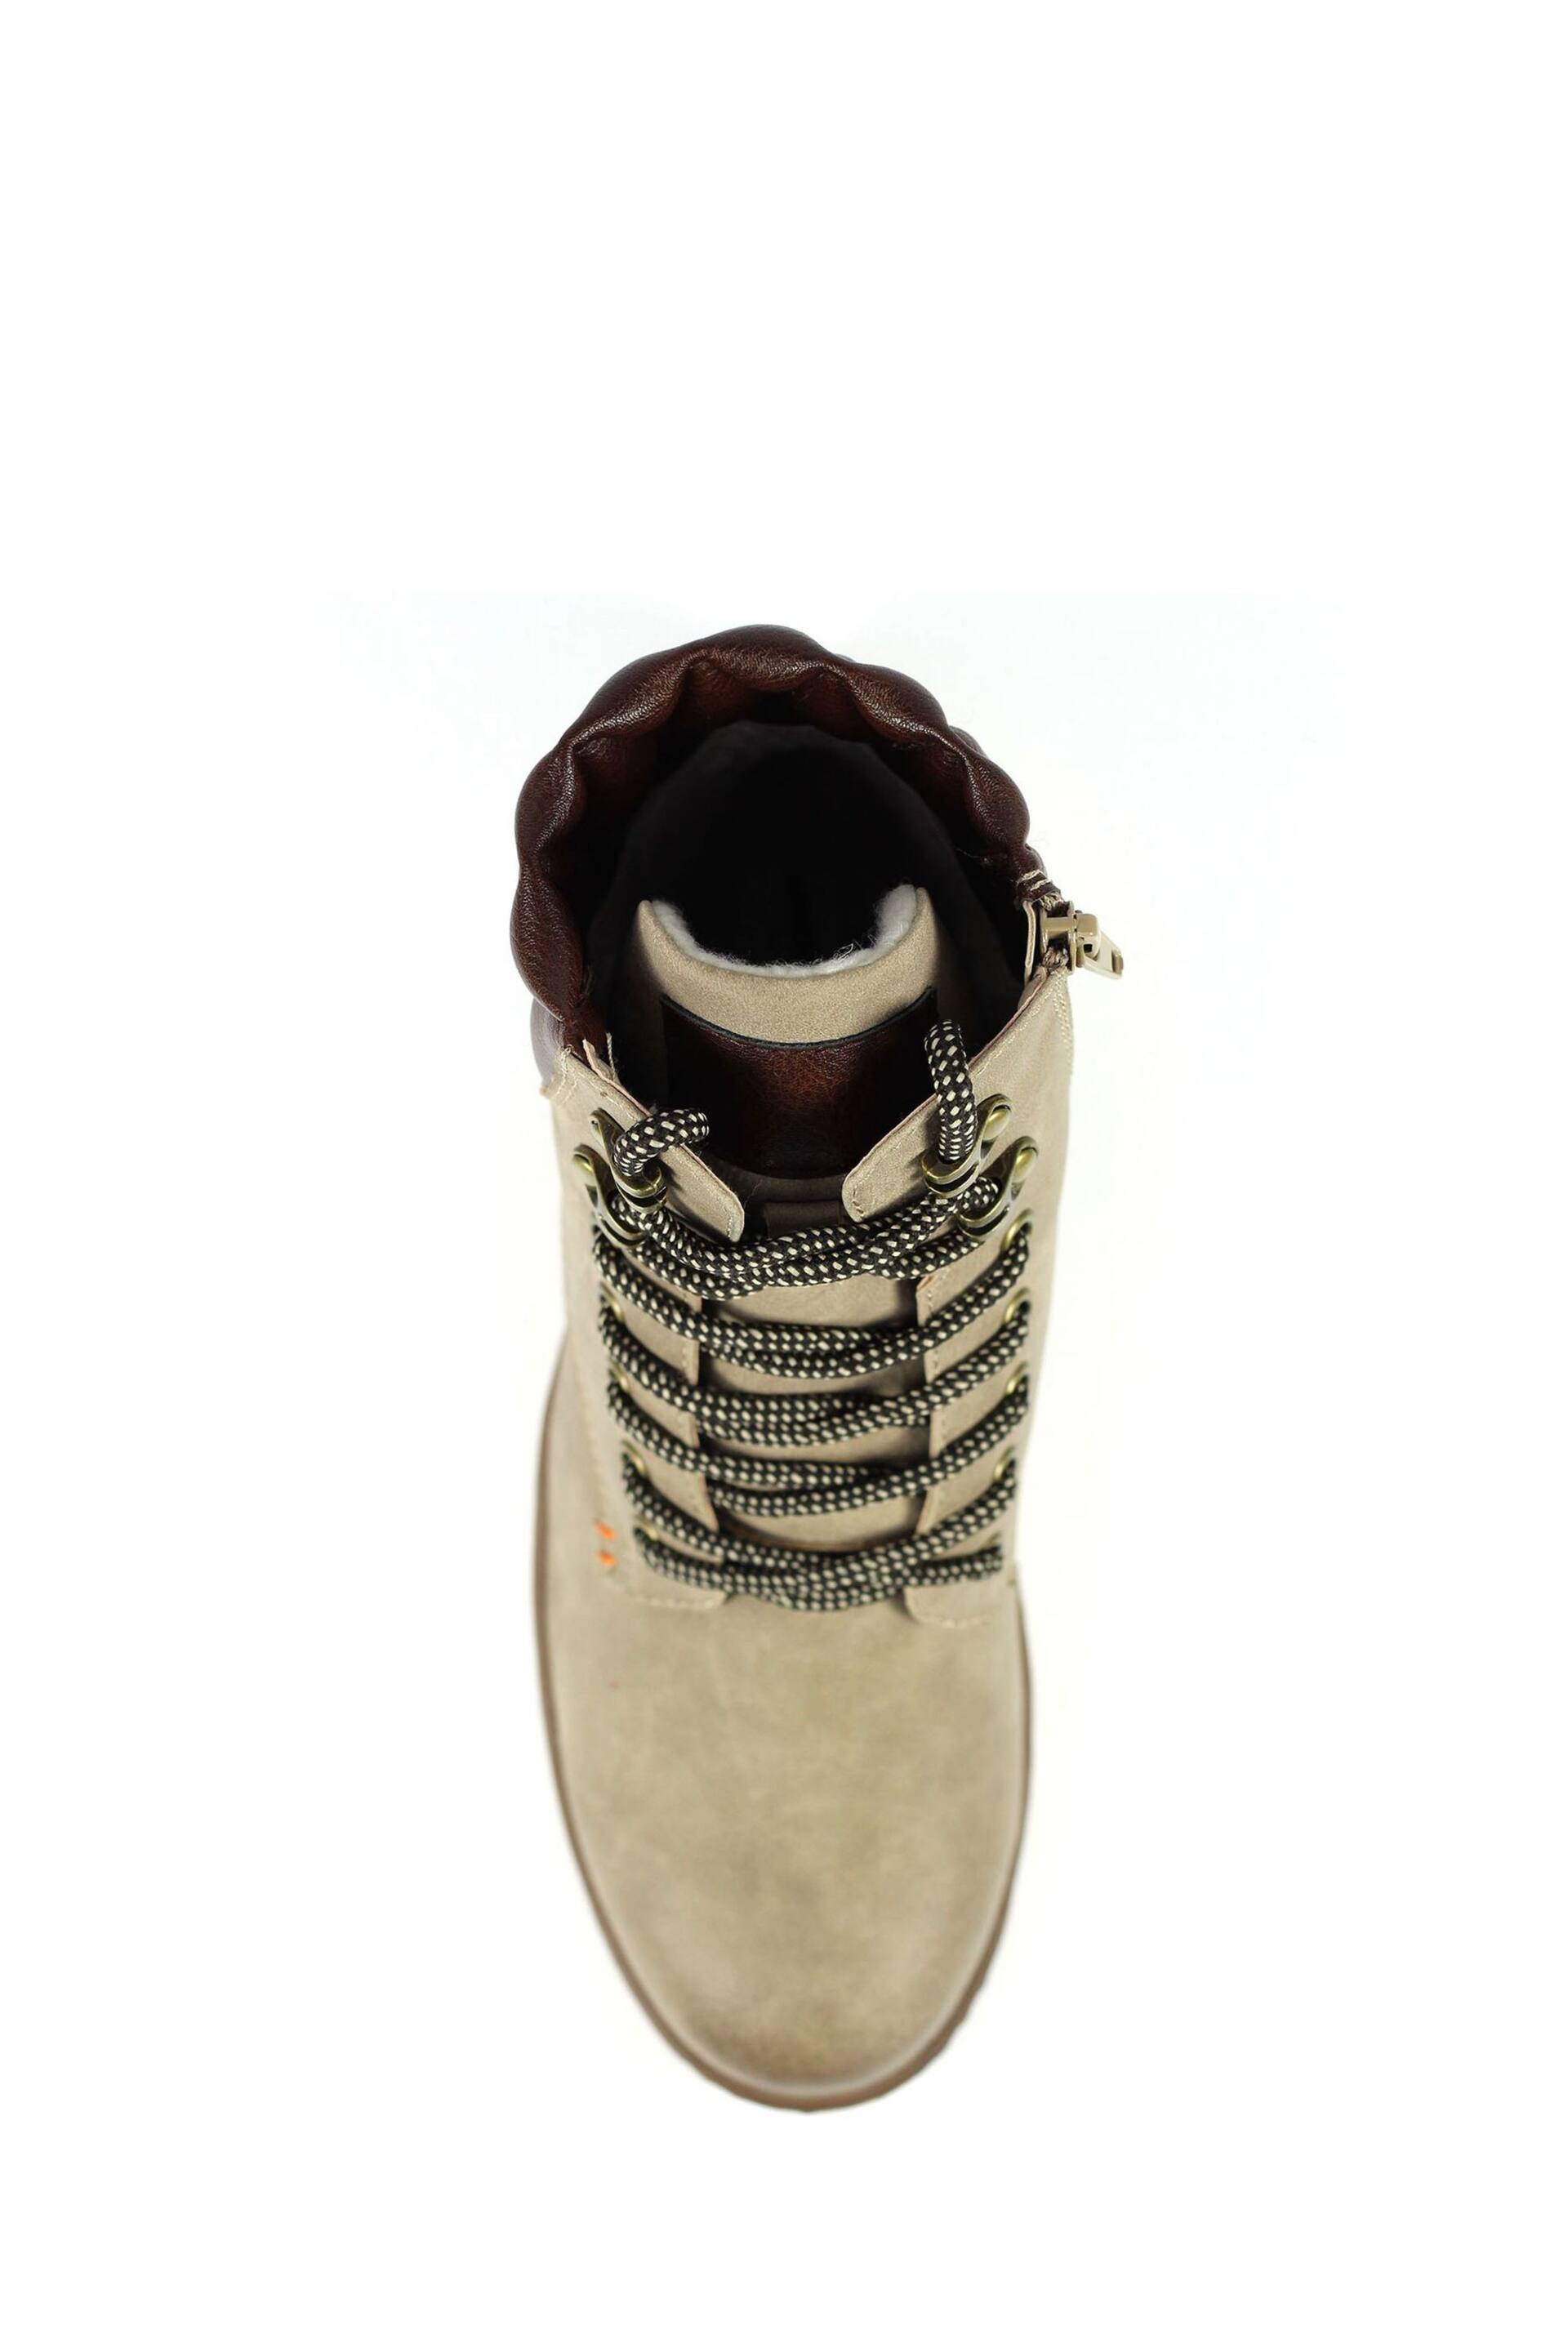 Lunar Natural Roberta Stone Waterproof Ankle Boots - Image 6 of 8